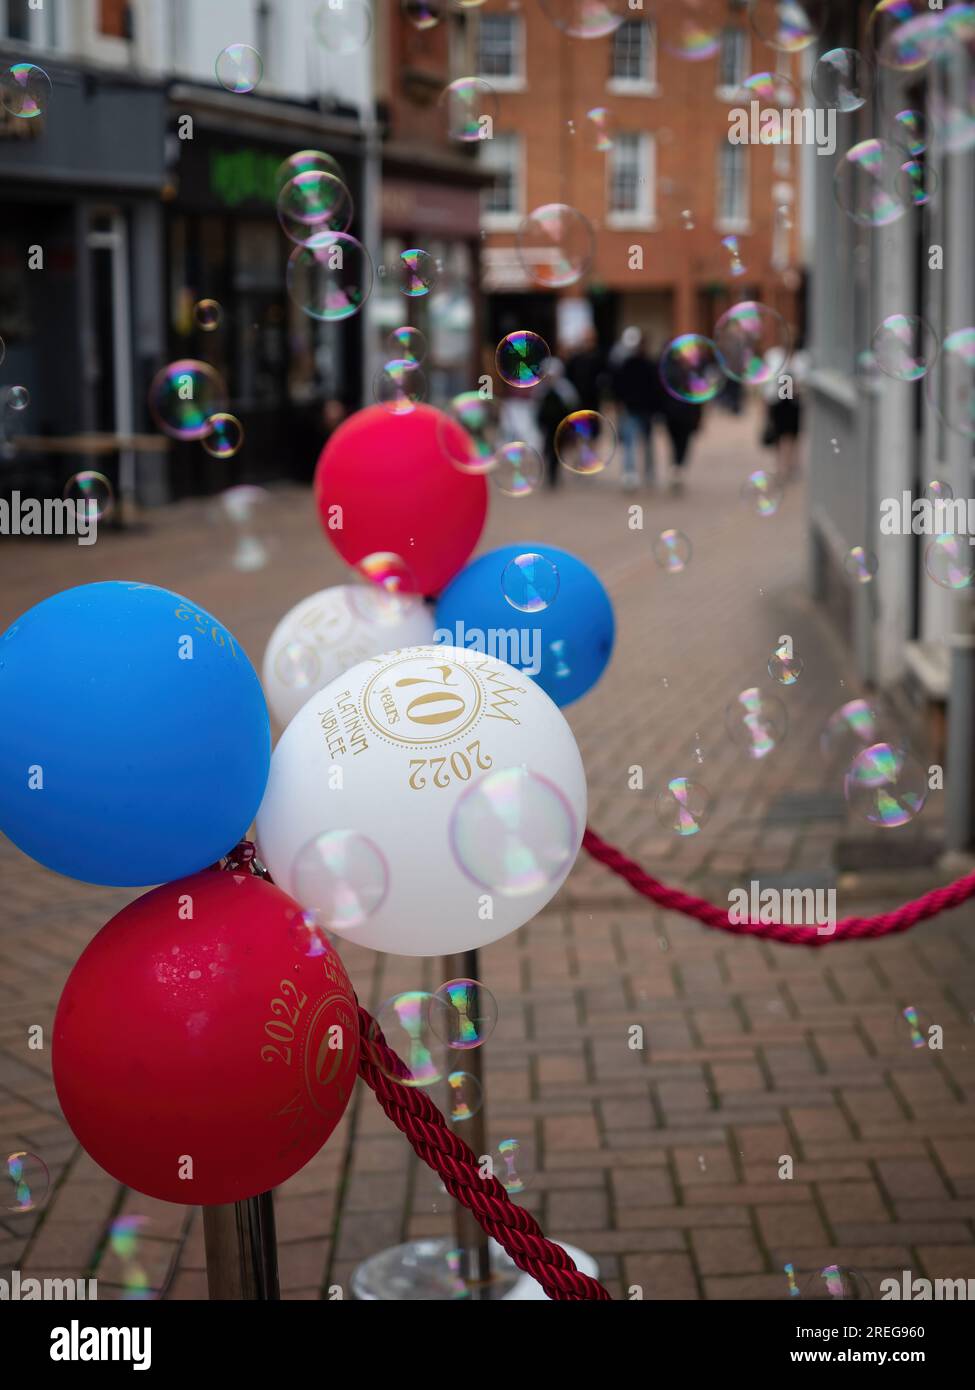 Red, white and blue balloons on display in Banbury town center in preparation for the Queen's Platinum Jubilee celebrations in June 2022 Stock Photo